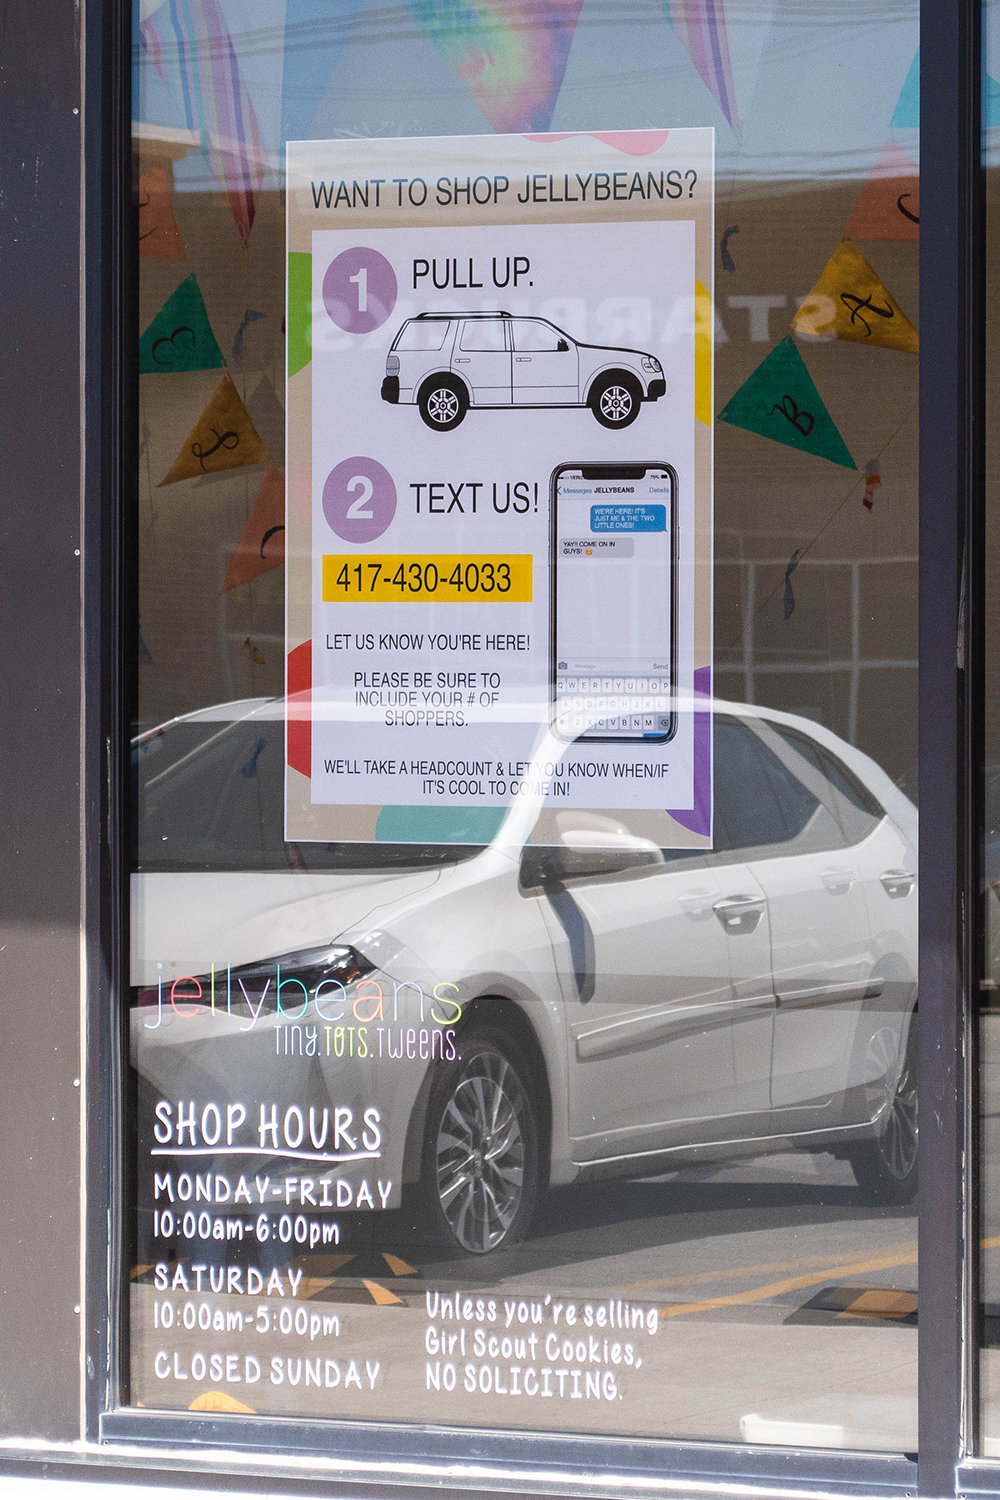 On Jellybeans' front door, a new system outlines how guests should enter the store.